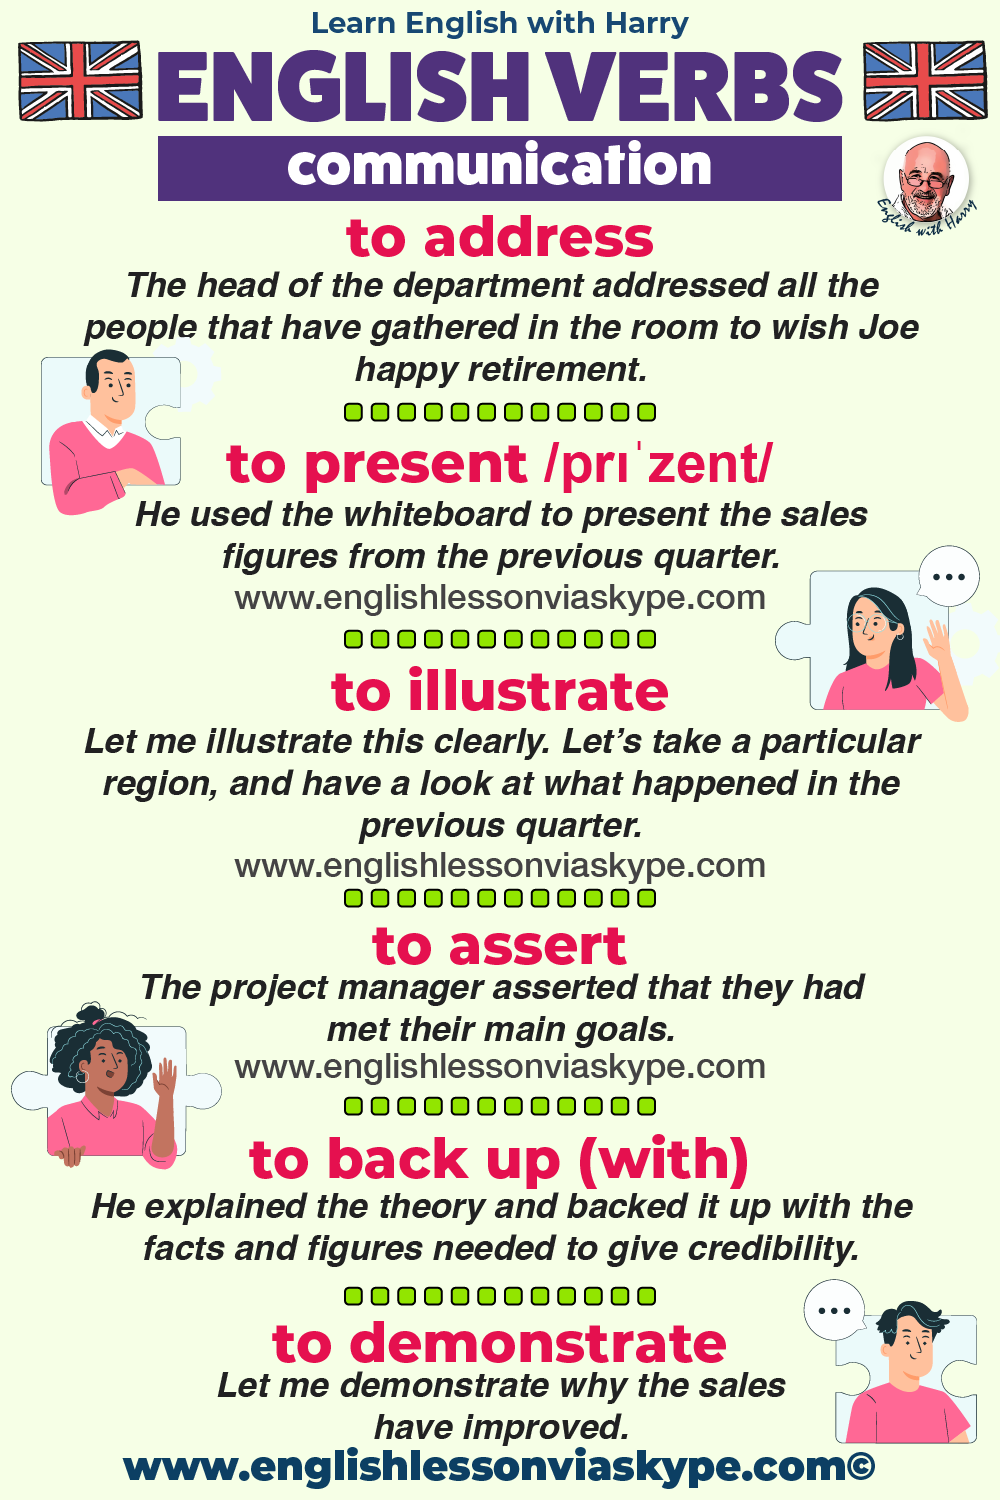 Crucial communication verbs in English. Advanced English lessons on Zoom and Skype. #learnenglish